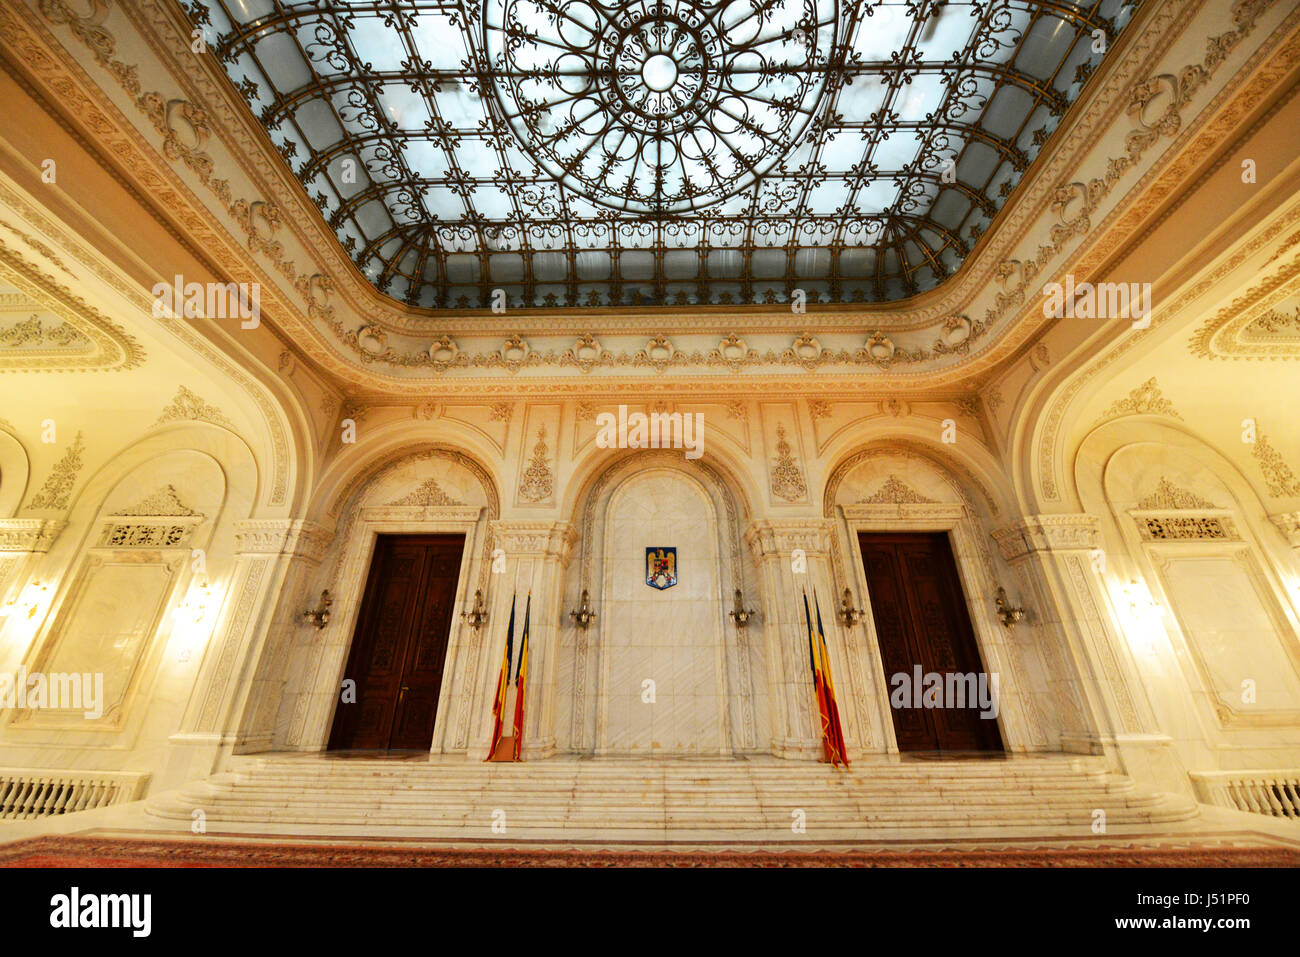 Inside The Palace of the Parliament in Bucharest, Romania. Stock Photo